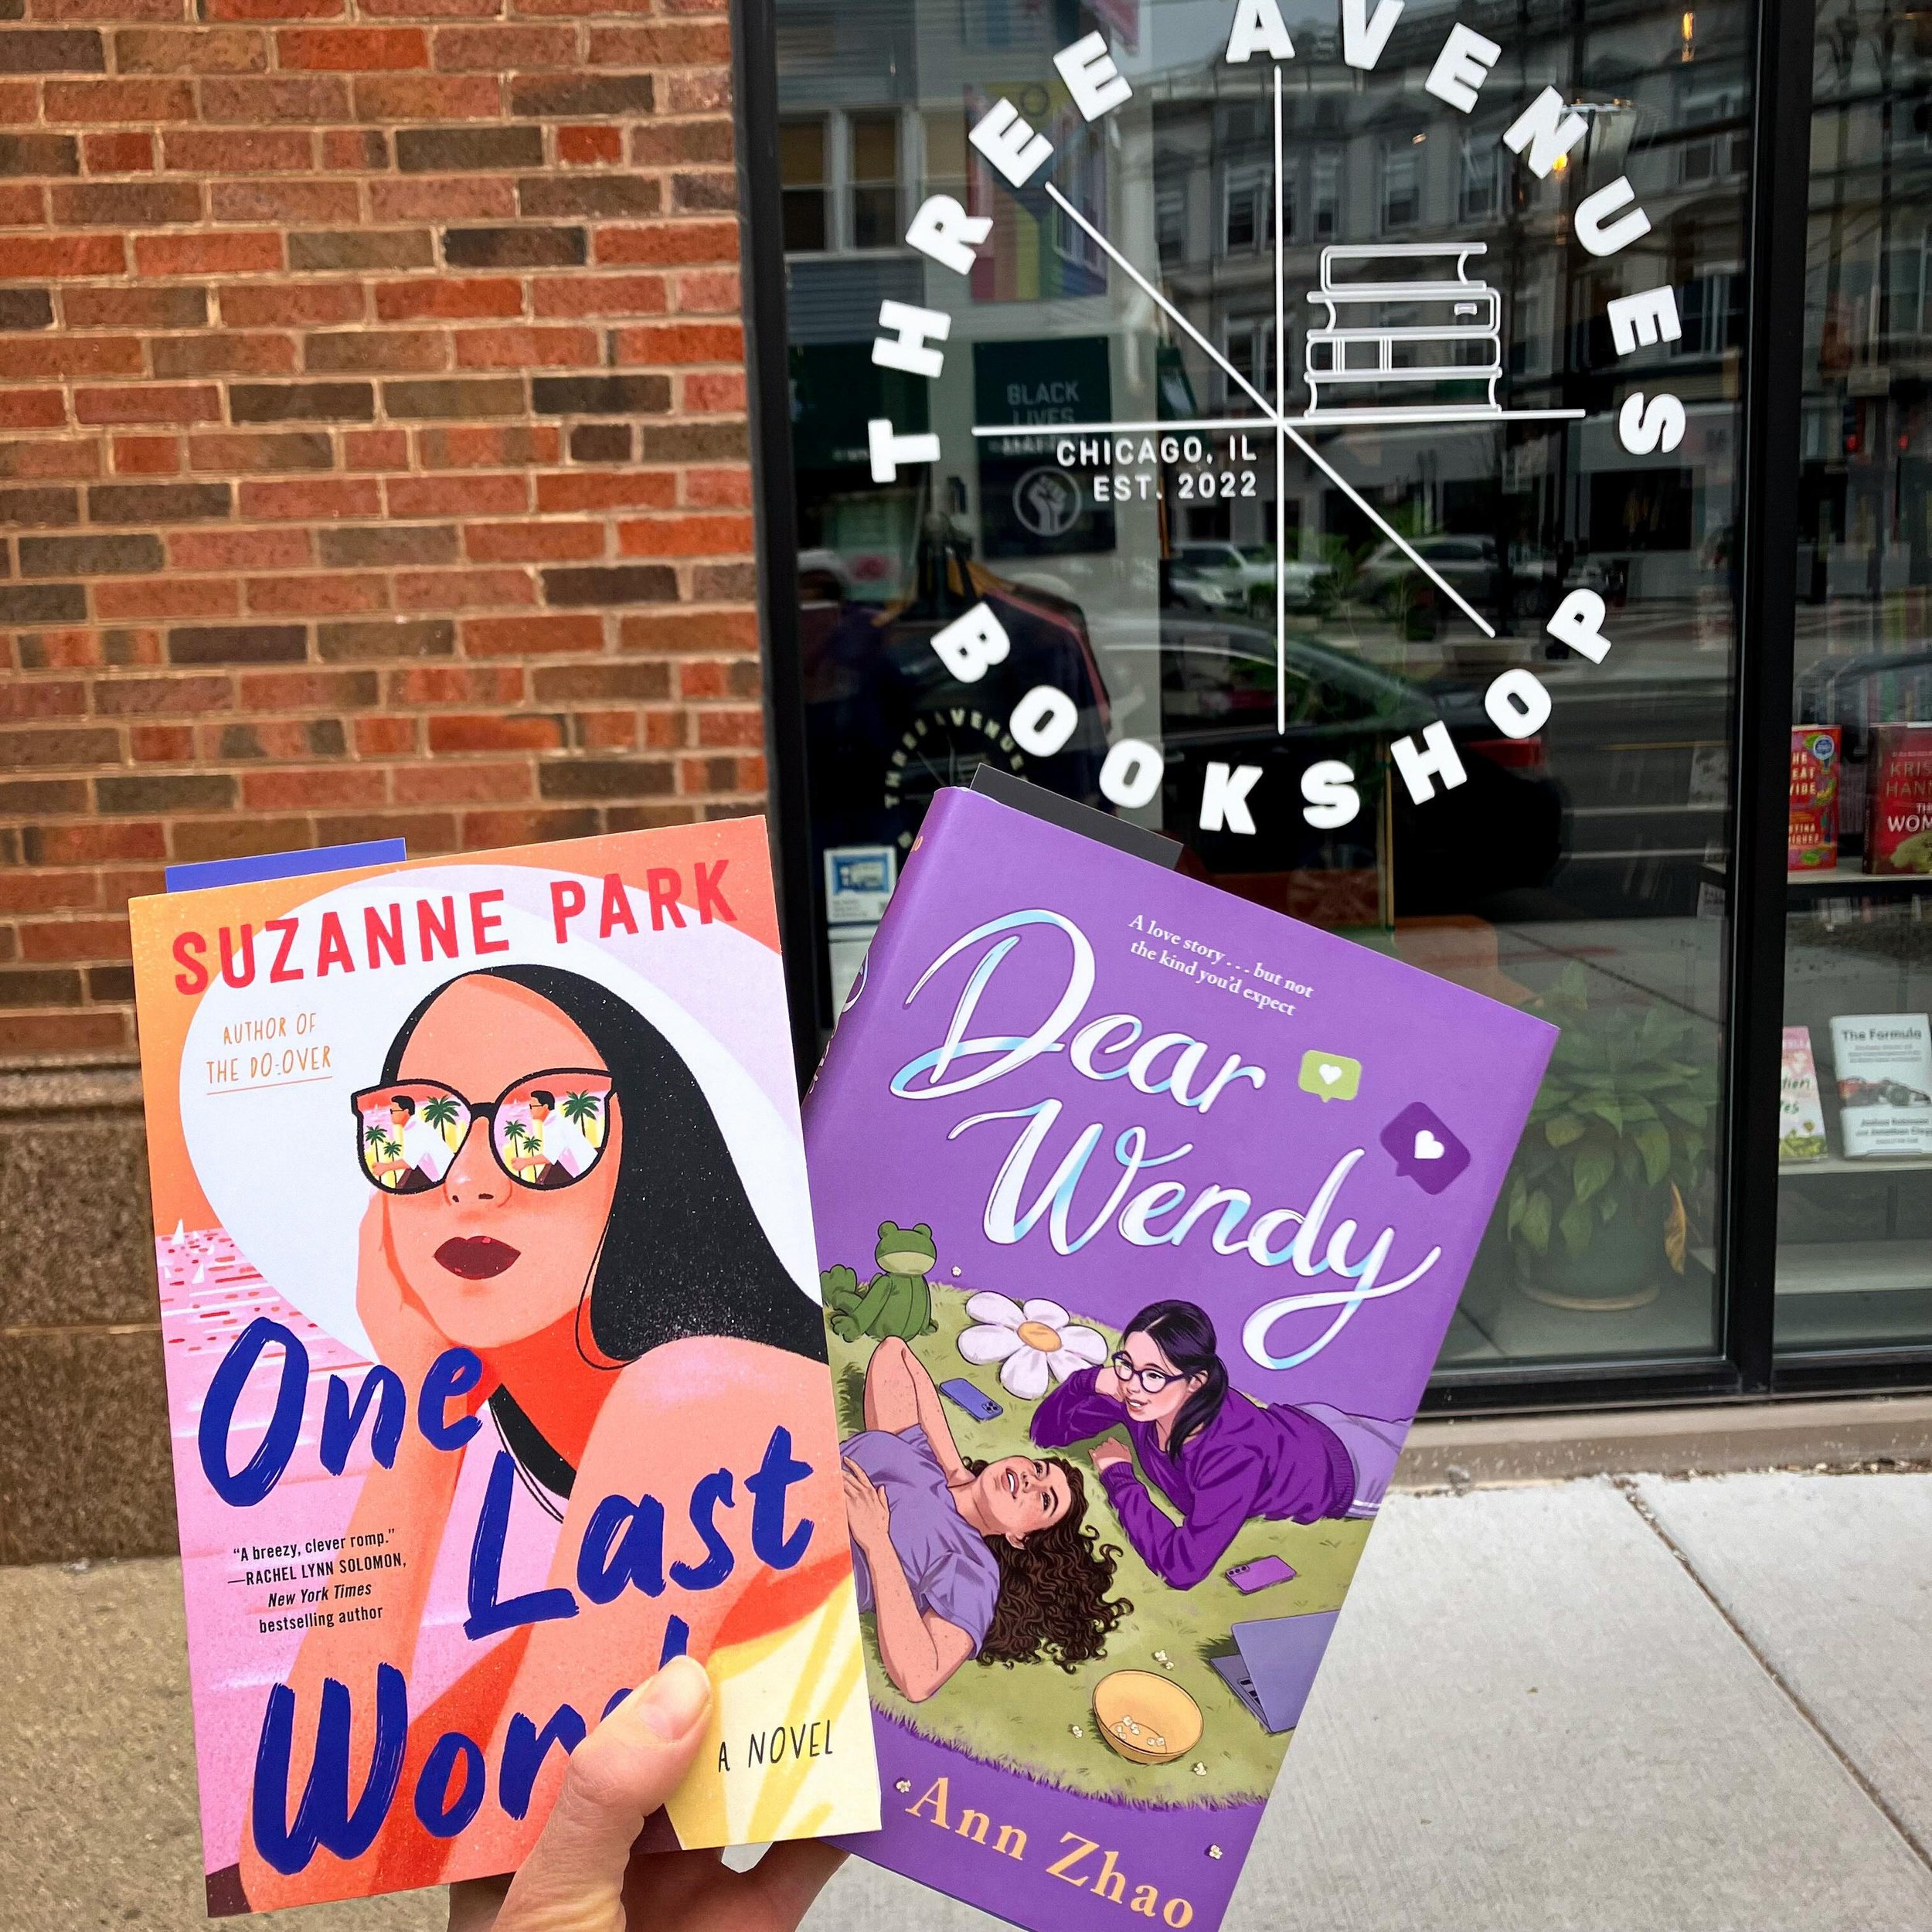 Finally made it to @threeavenuesbookshop to pick up two of my most anticipated new releases from this week: ONE LAST WORD by @suzannepark and DEAR WENDY by @annzhao_ ! Now comes the hard part&hellip;which one should I read first?? 🤔

Congrats again 